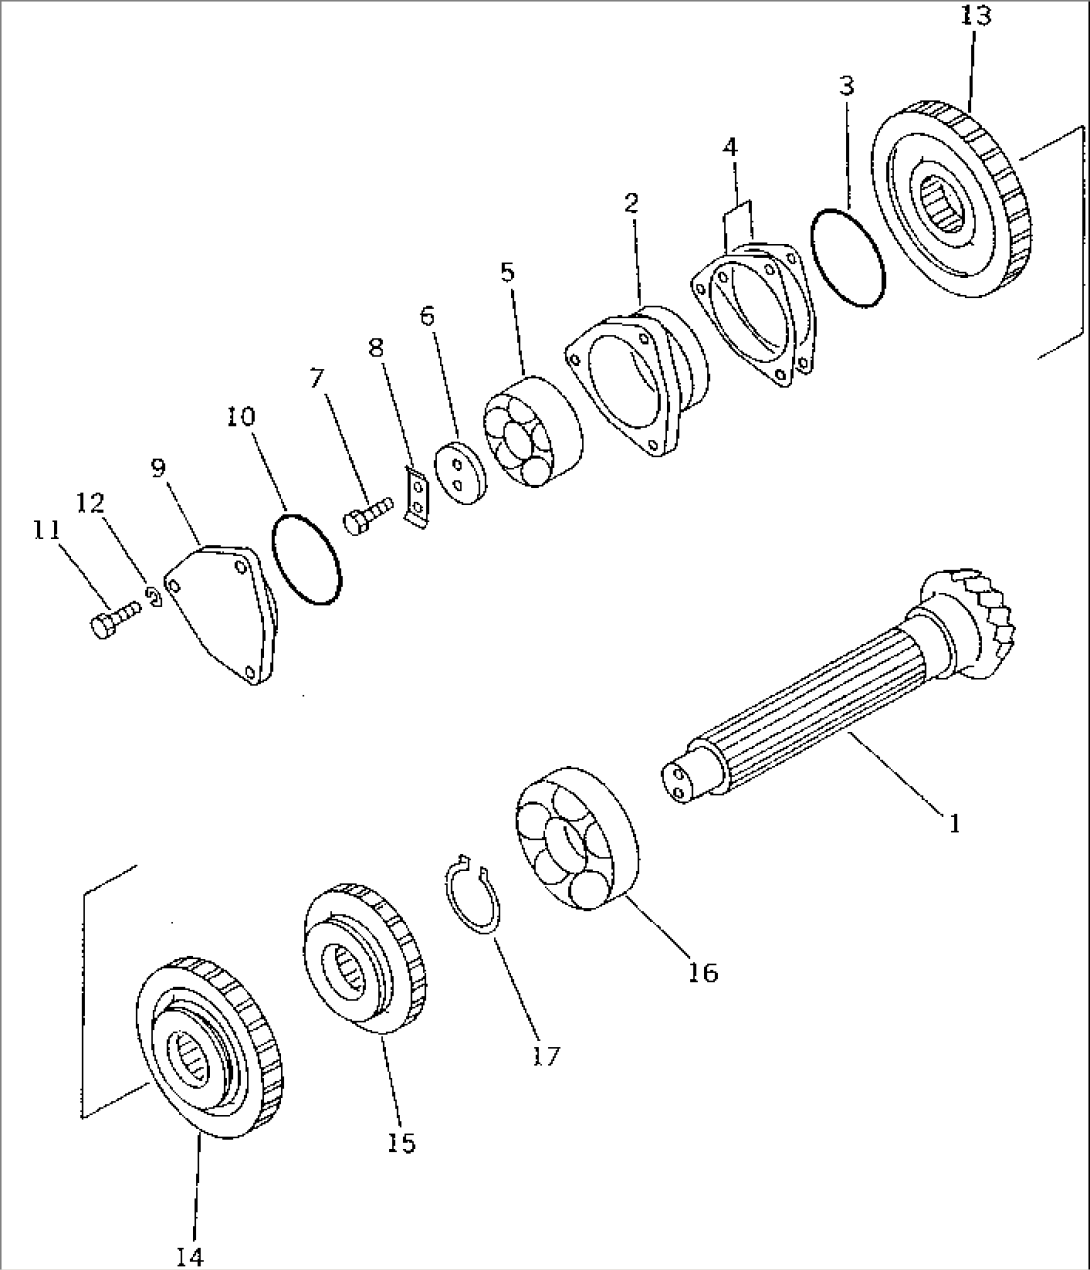 TRANSMISSION (COUNTER SHAFT AND GEAR) (4/5) (WIHTOUT BACK-UP SWITCH)